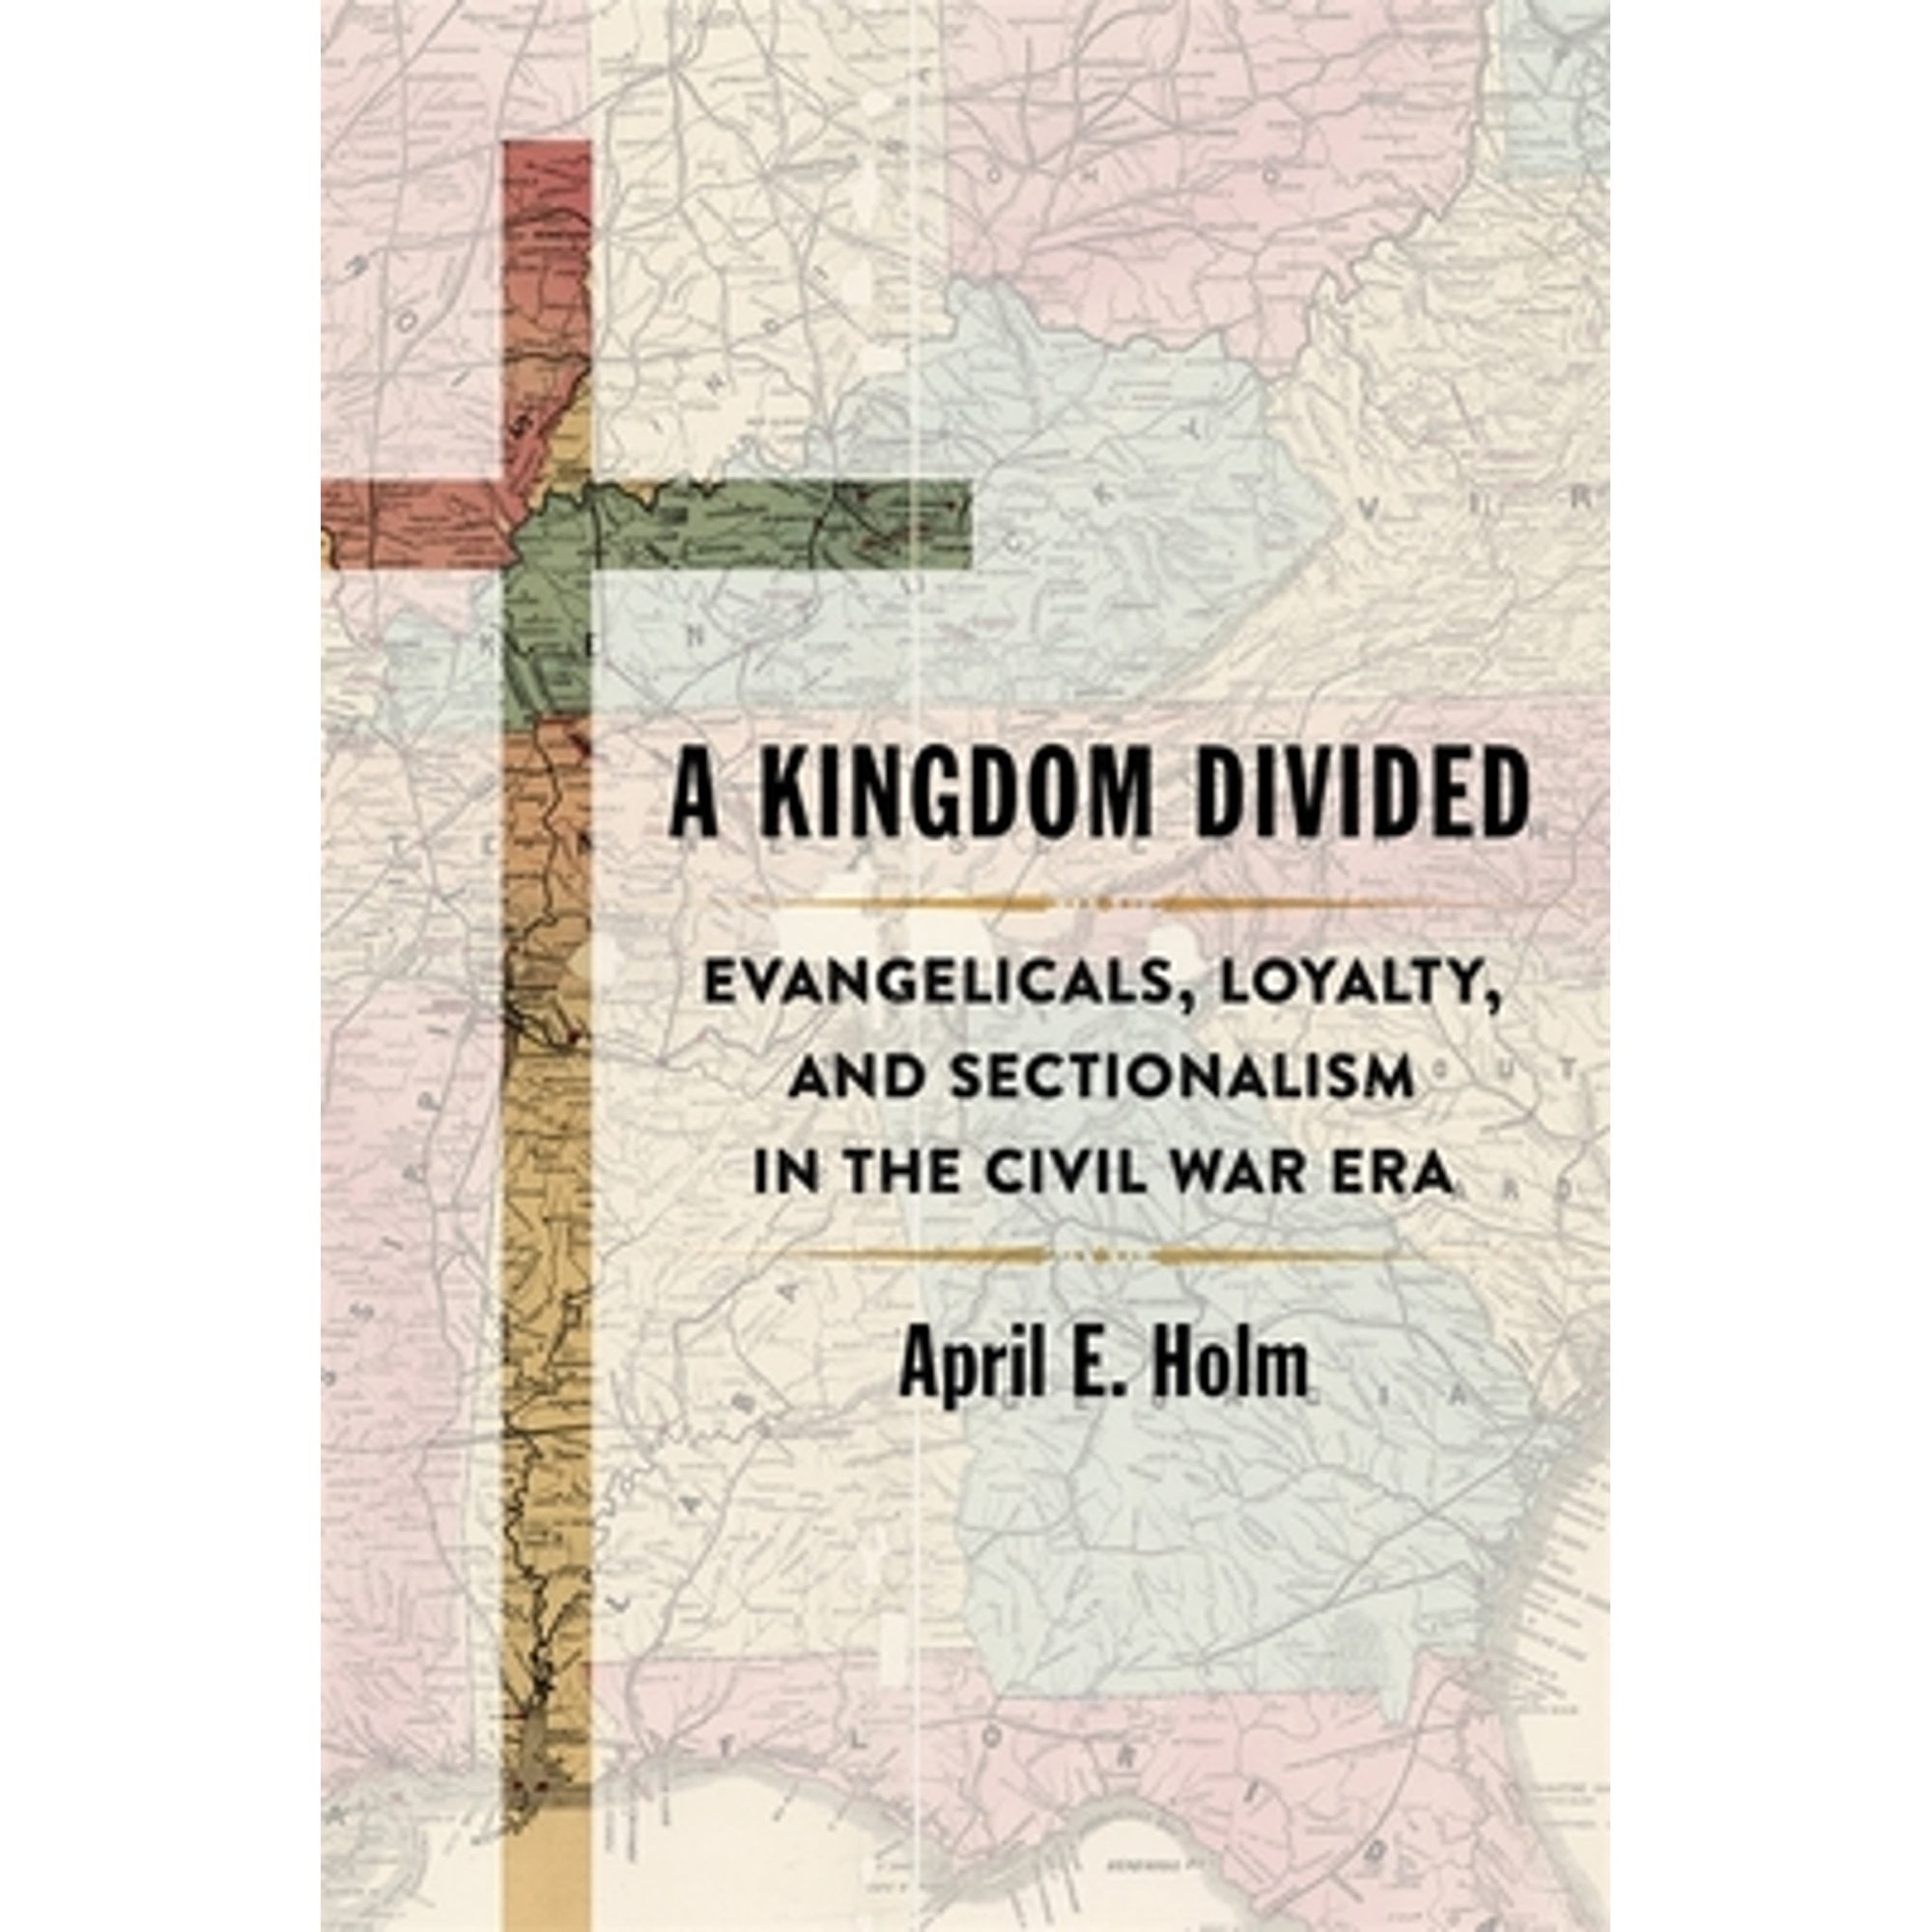 Pre-Owned A Kingdom Divided: Evangelicals, Loyalty, and Sectionalism in the Civil War Era (Hardcover) by April E Holm